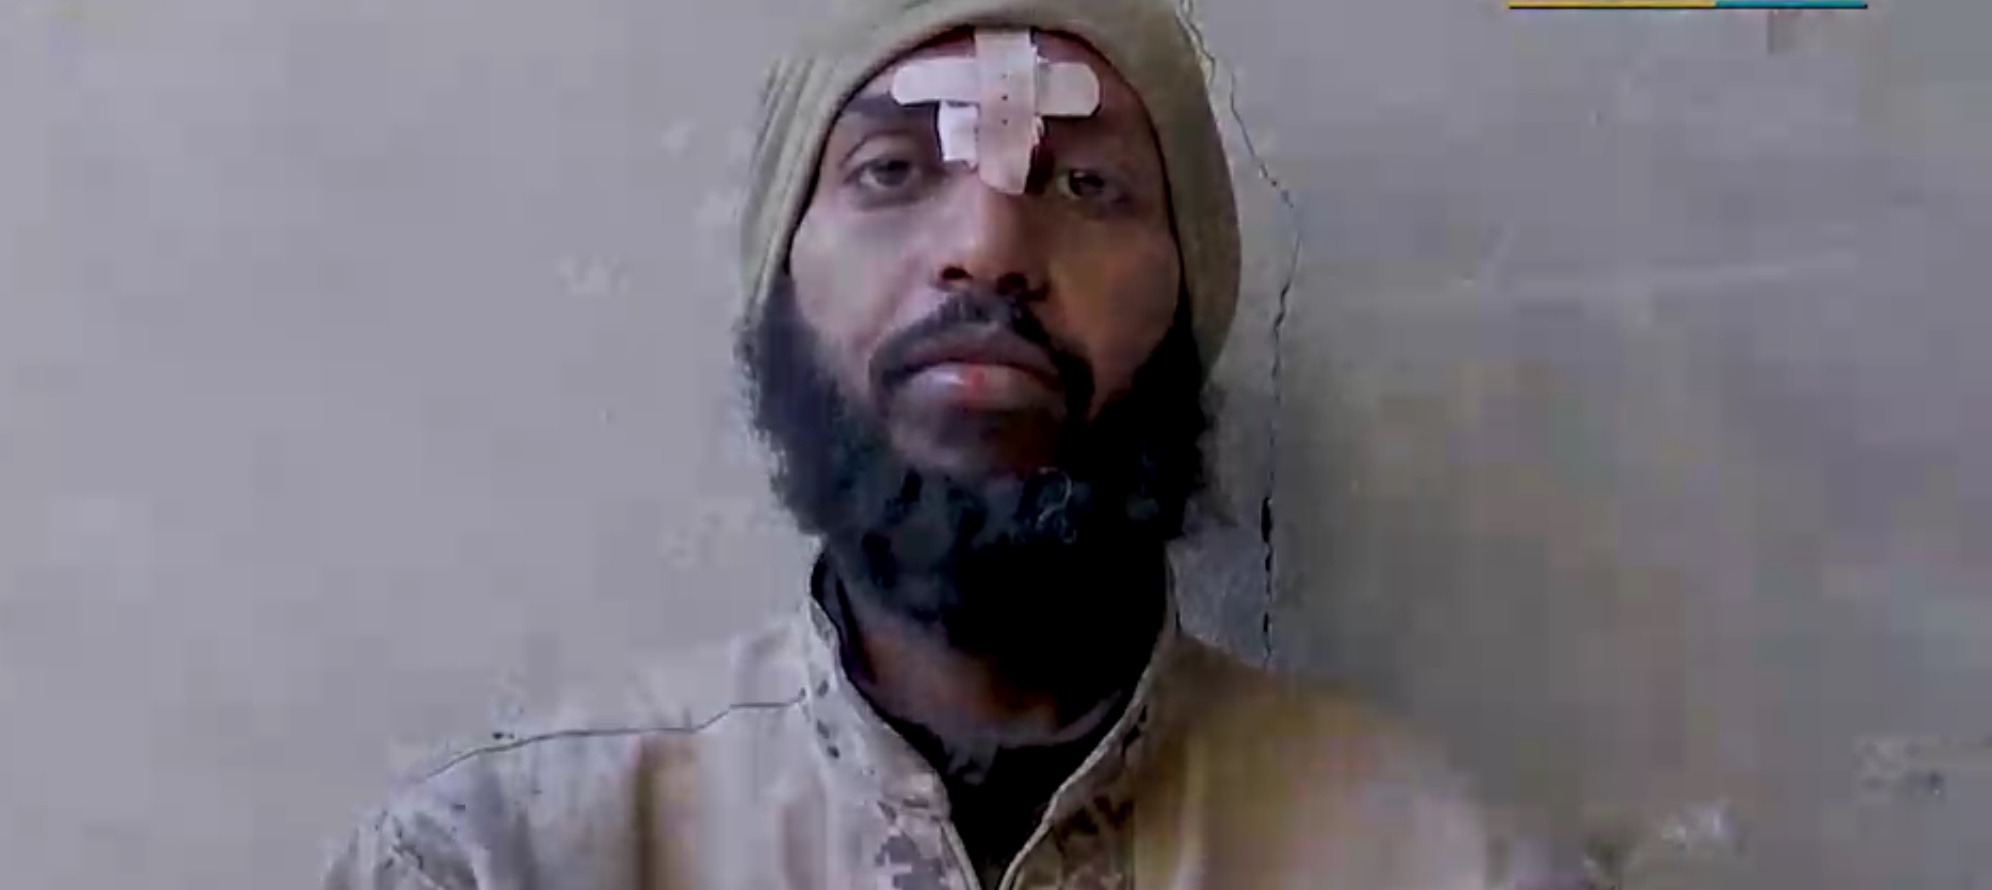 Alleged narrator of ISIS execution fims Mohammed Abdullah Mohammed. Global News screenshot, Feb. 17, 2019. Canadian 